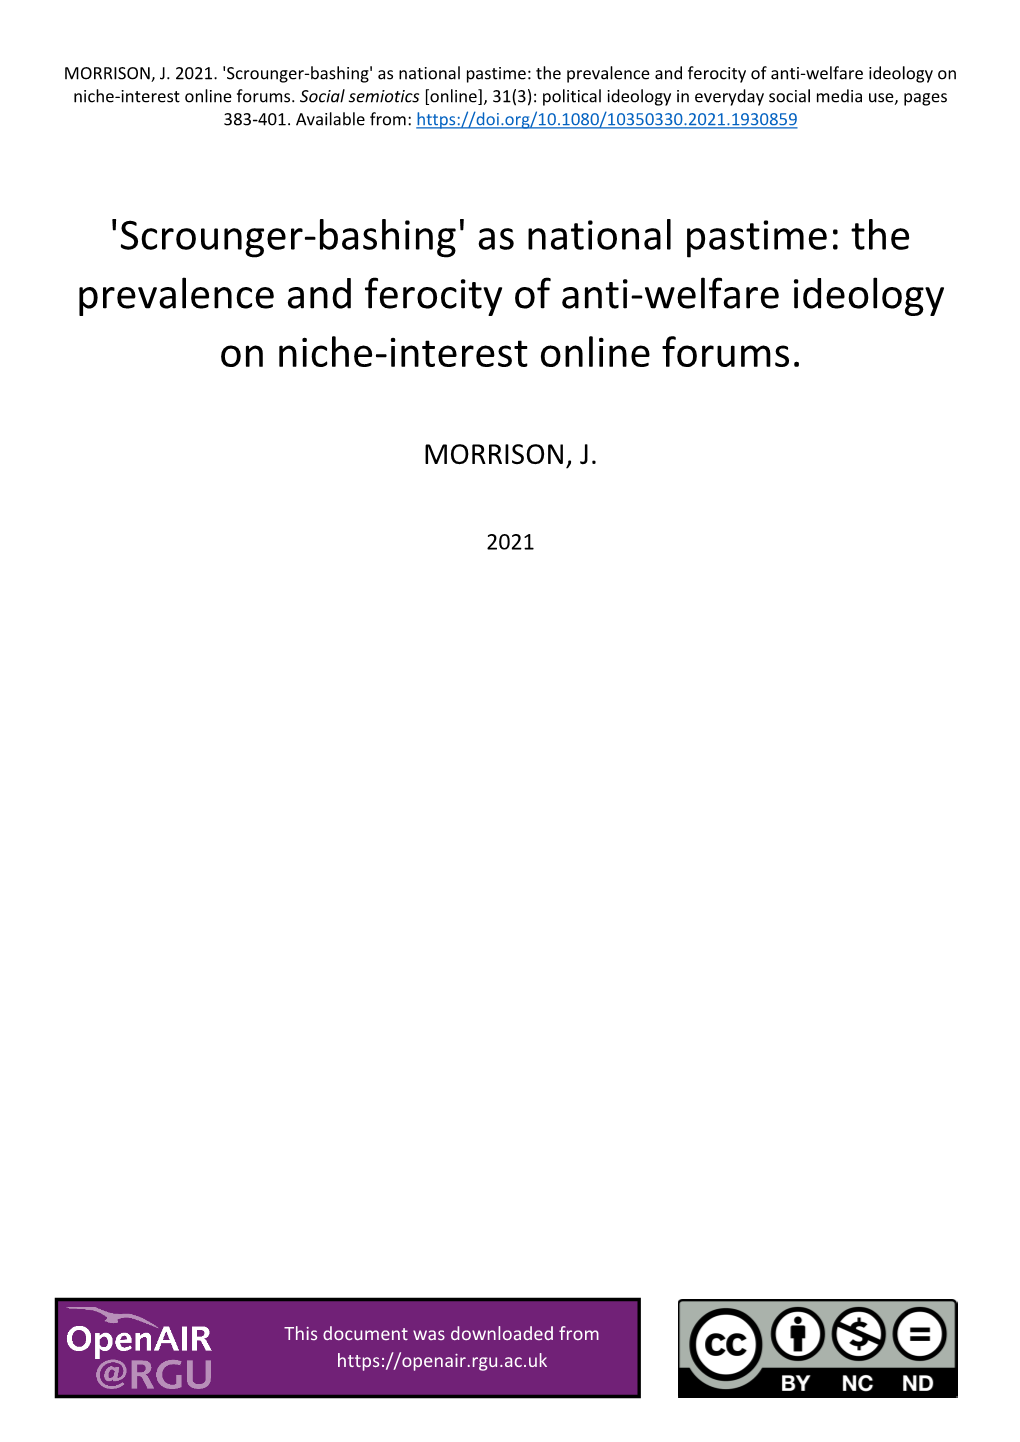 'Scrounger-Bashing' As National Pastime: the Prevalence and Ferocity of Anti-Welfare Ideology on Niche-Interest Online Forums